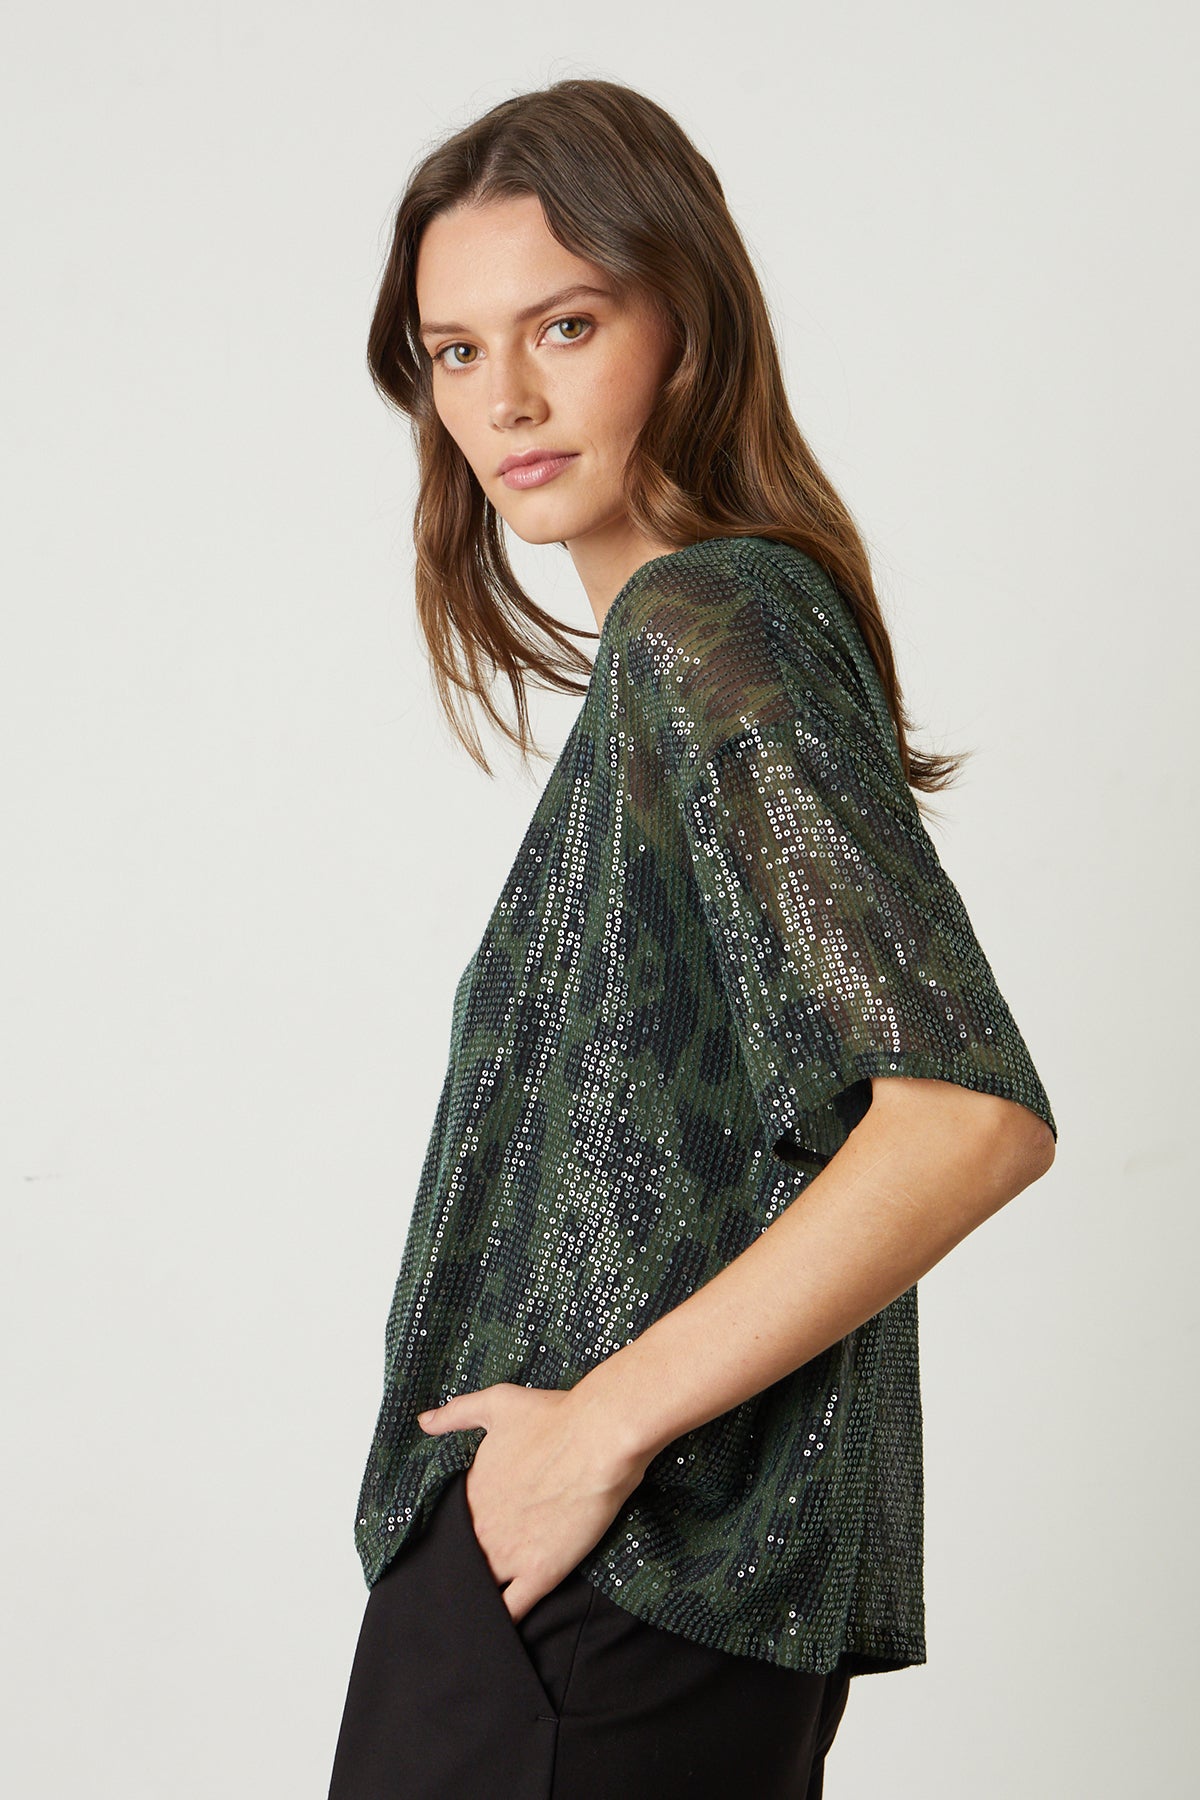   Alessa Printed Sequin Top in airbrush muted green and black mottled pattern side 